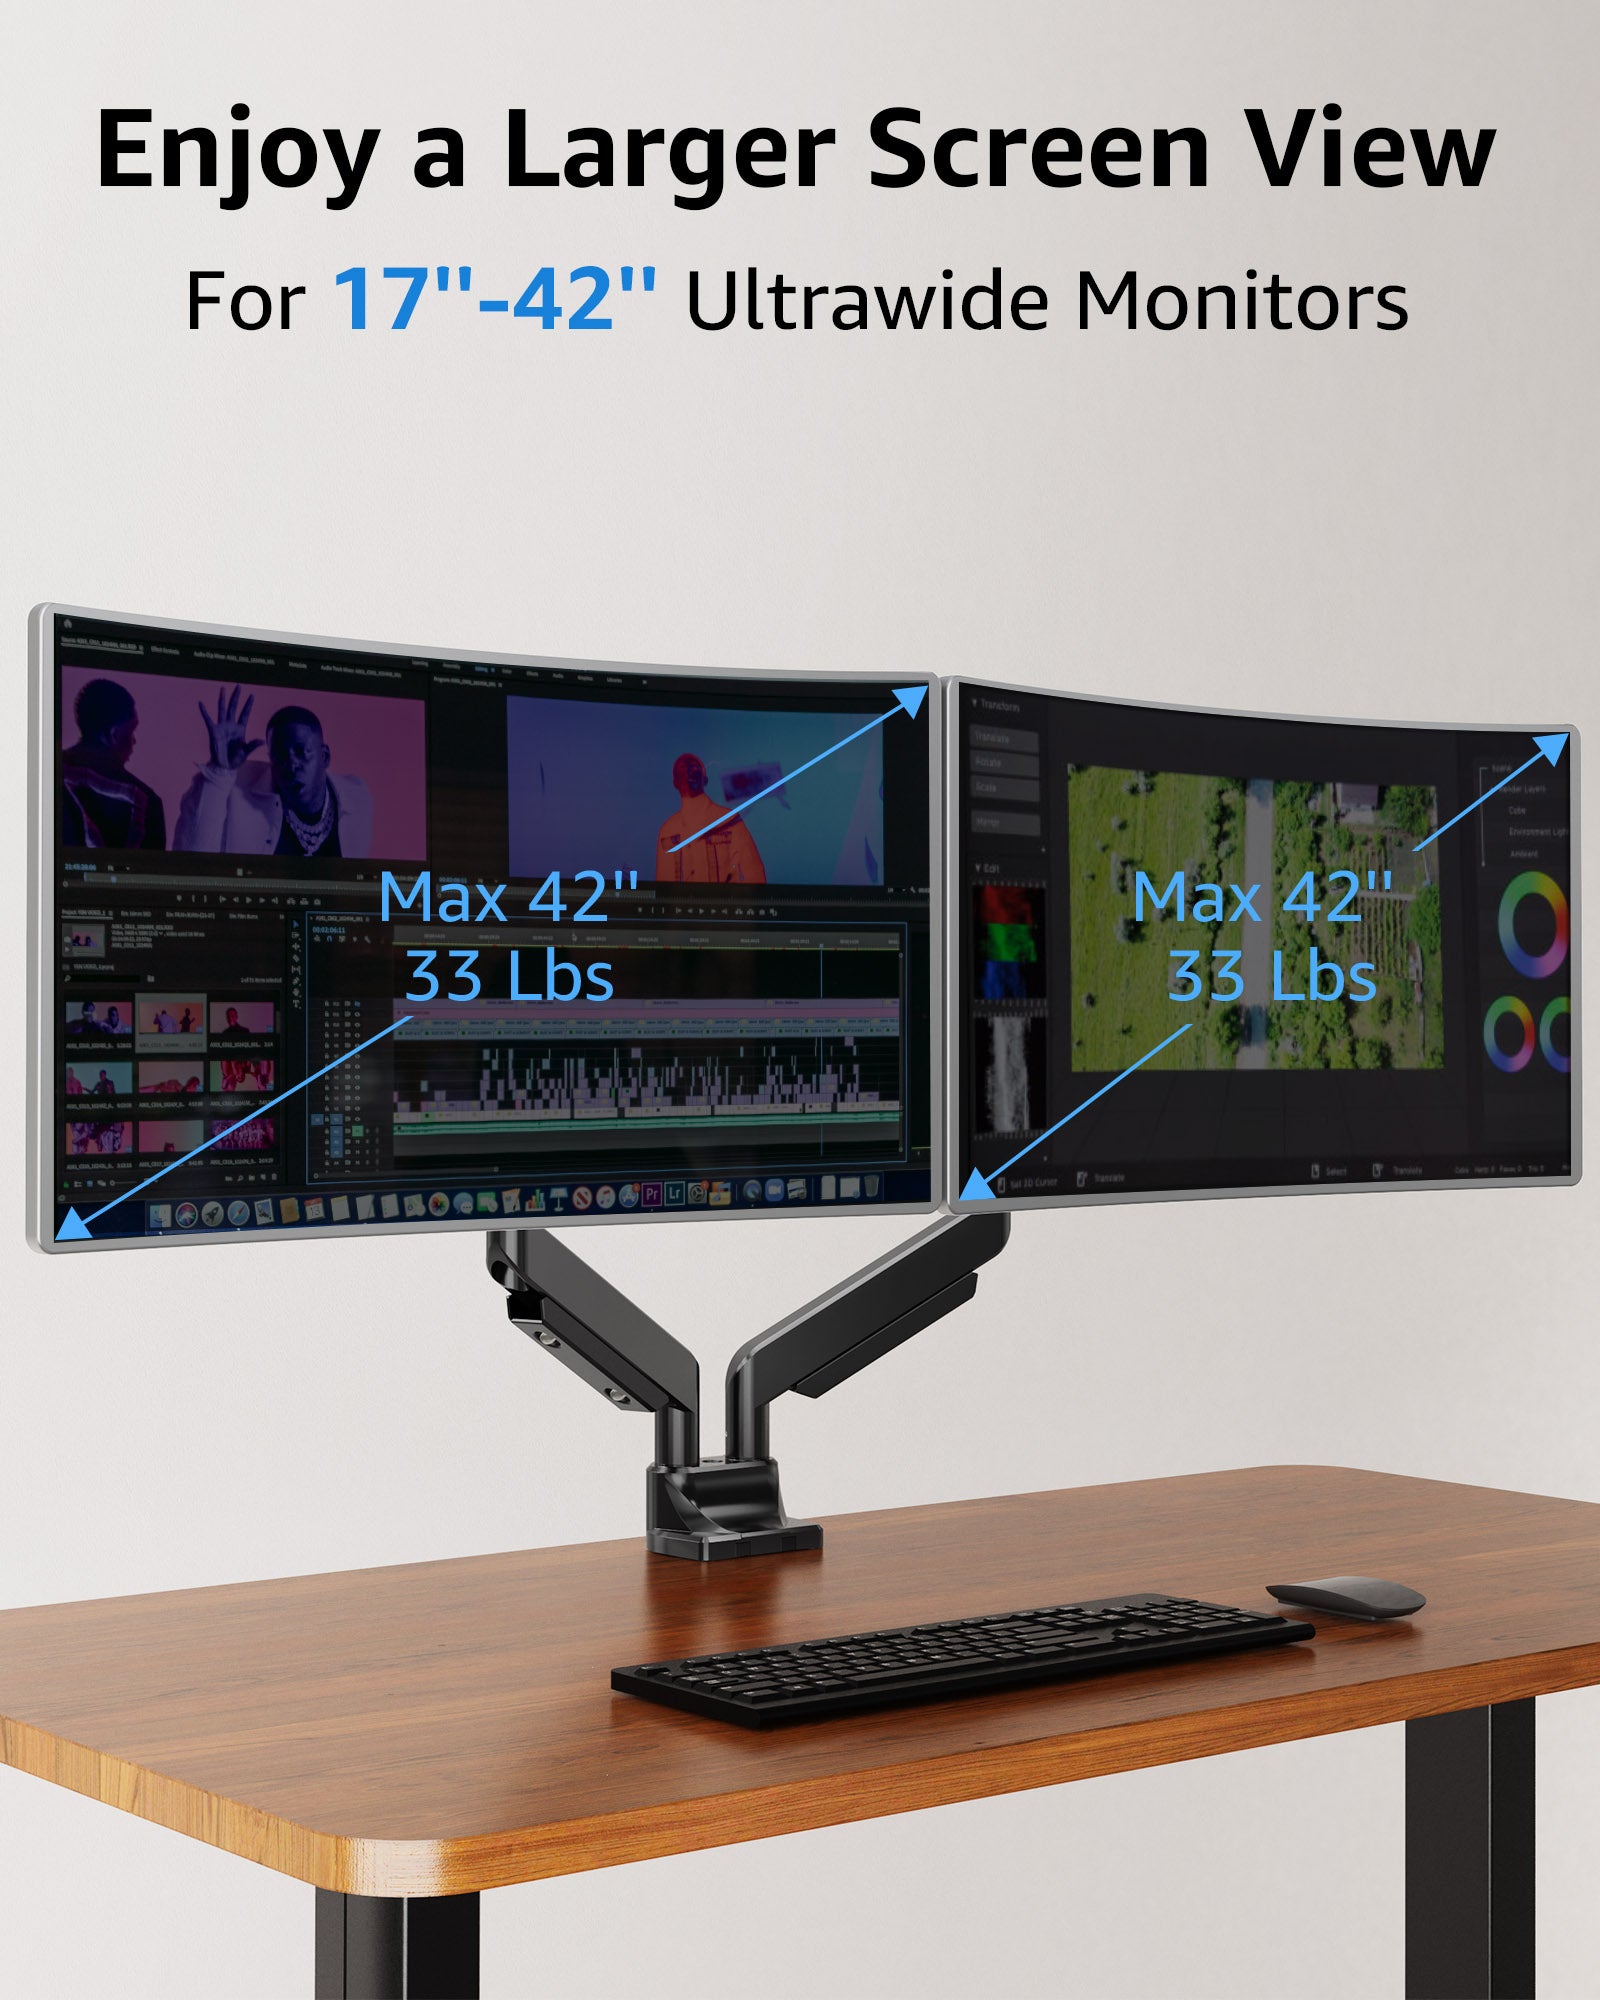 Dual Monitor Stand, Dual Monitor Arm, Dual Monitor Mount vesa Mount, up to  32 inch Monitor Desk Mount, soporte Monitor arms & Monitor Stands for 2  Monitors, Dual Monitor Riser Stand for